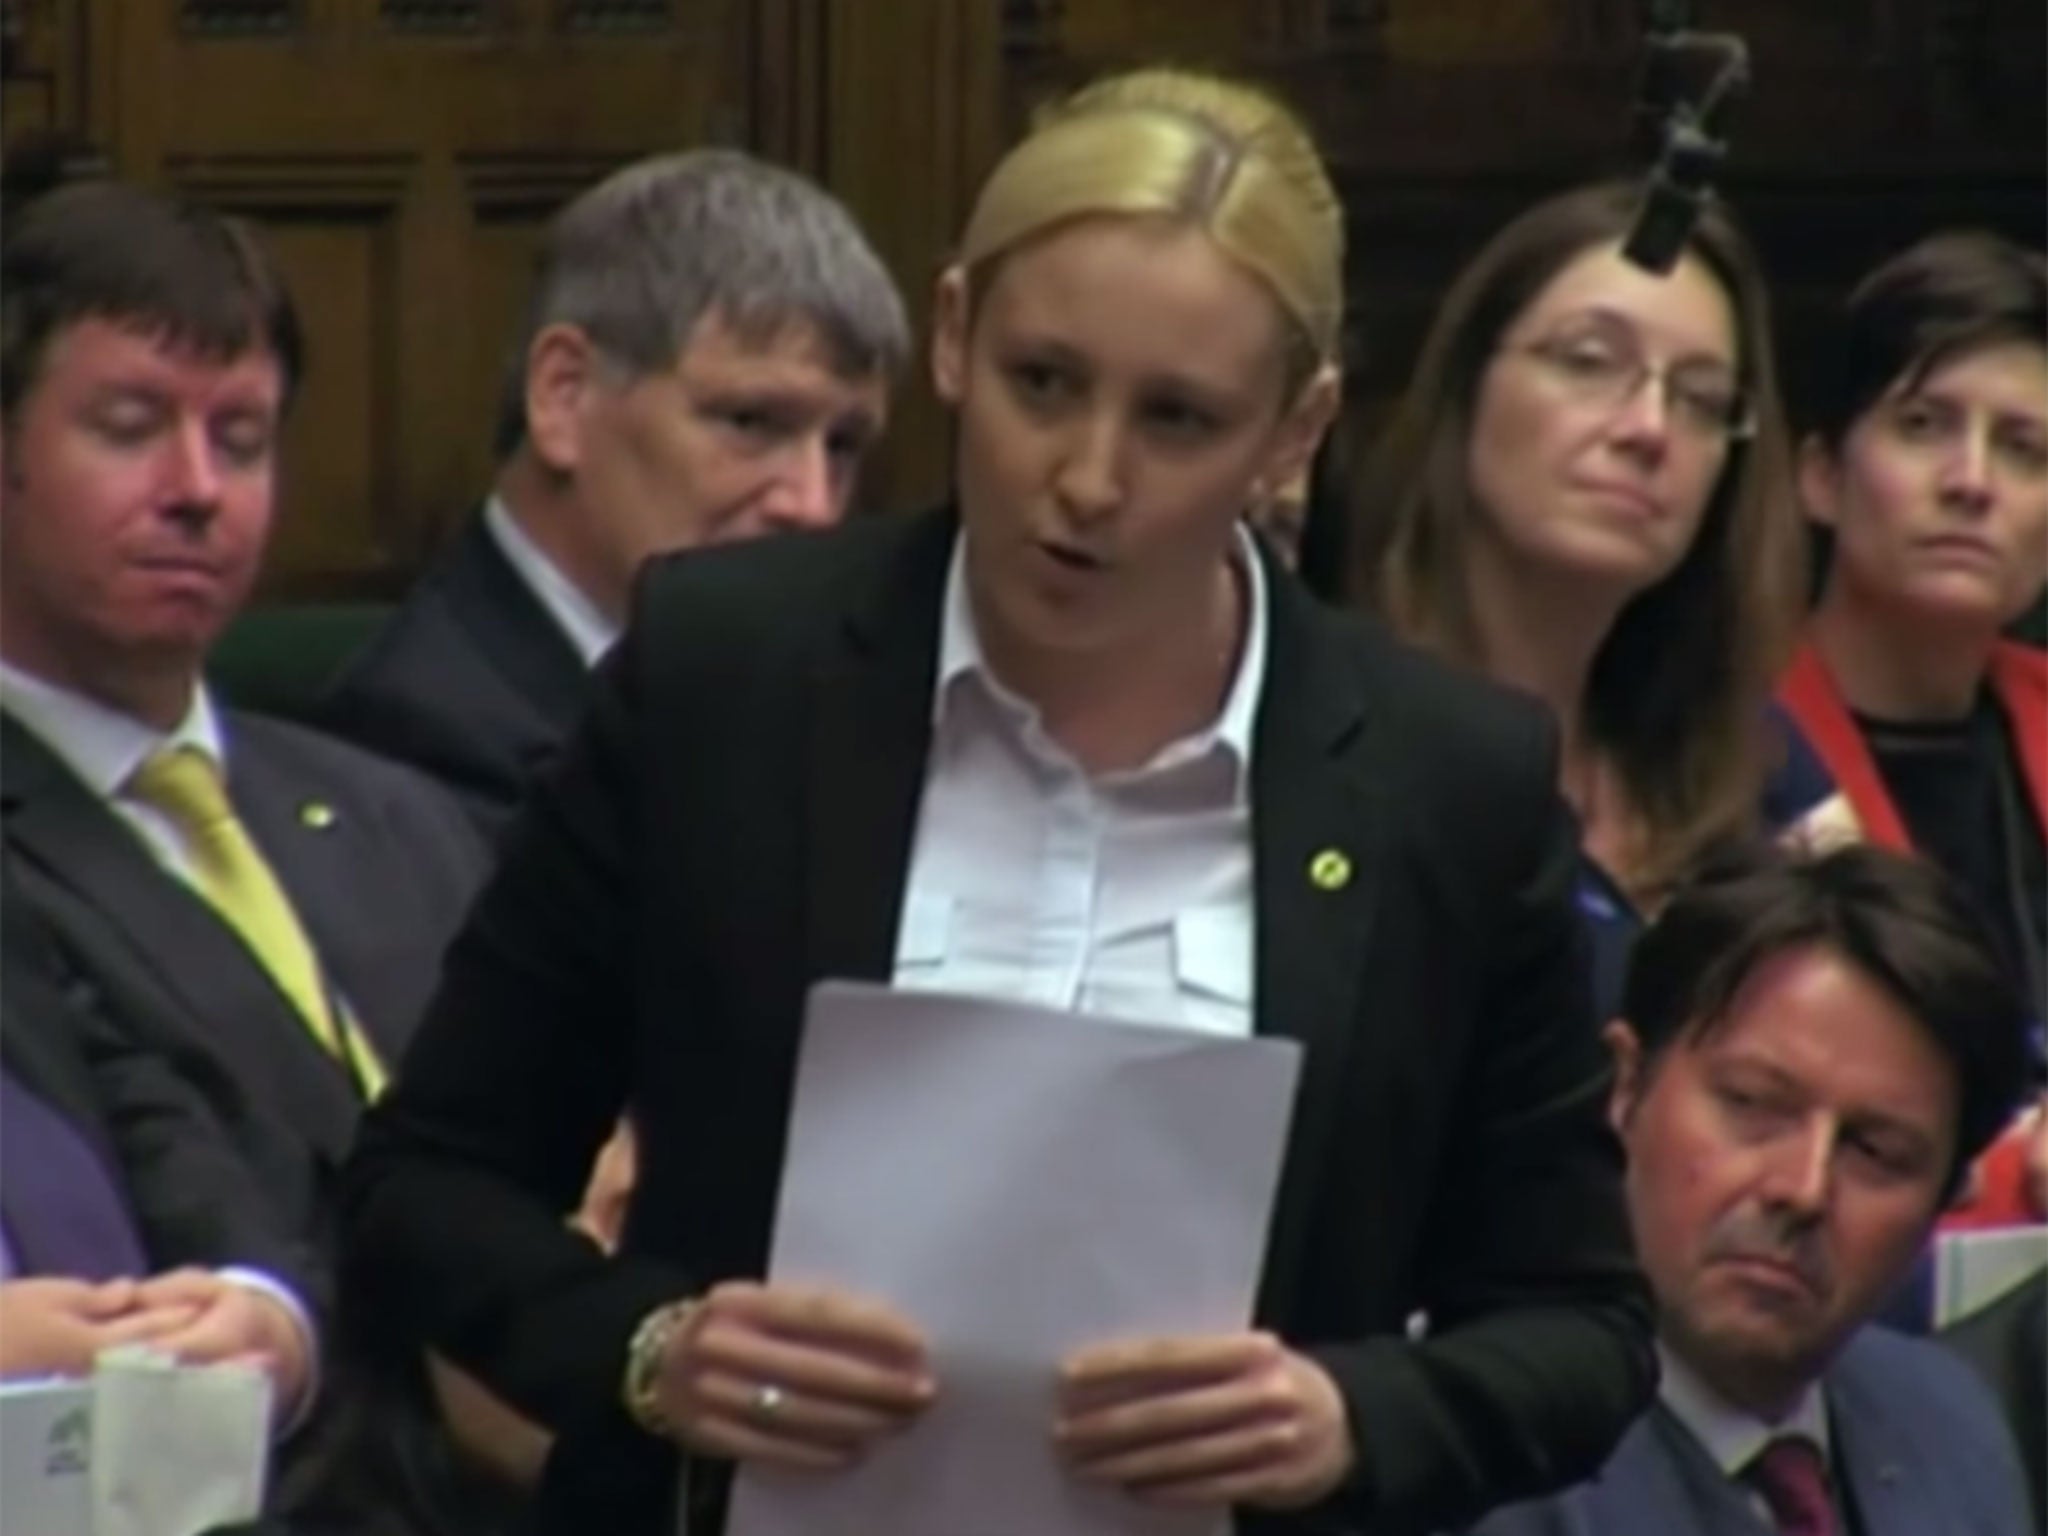 Mhairi Black delivers her maiden speech to the House of Commons